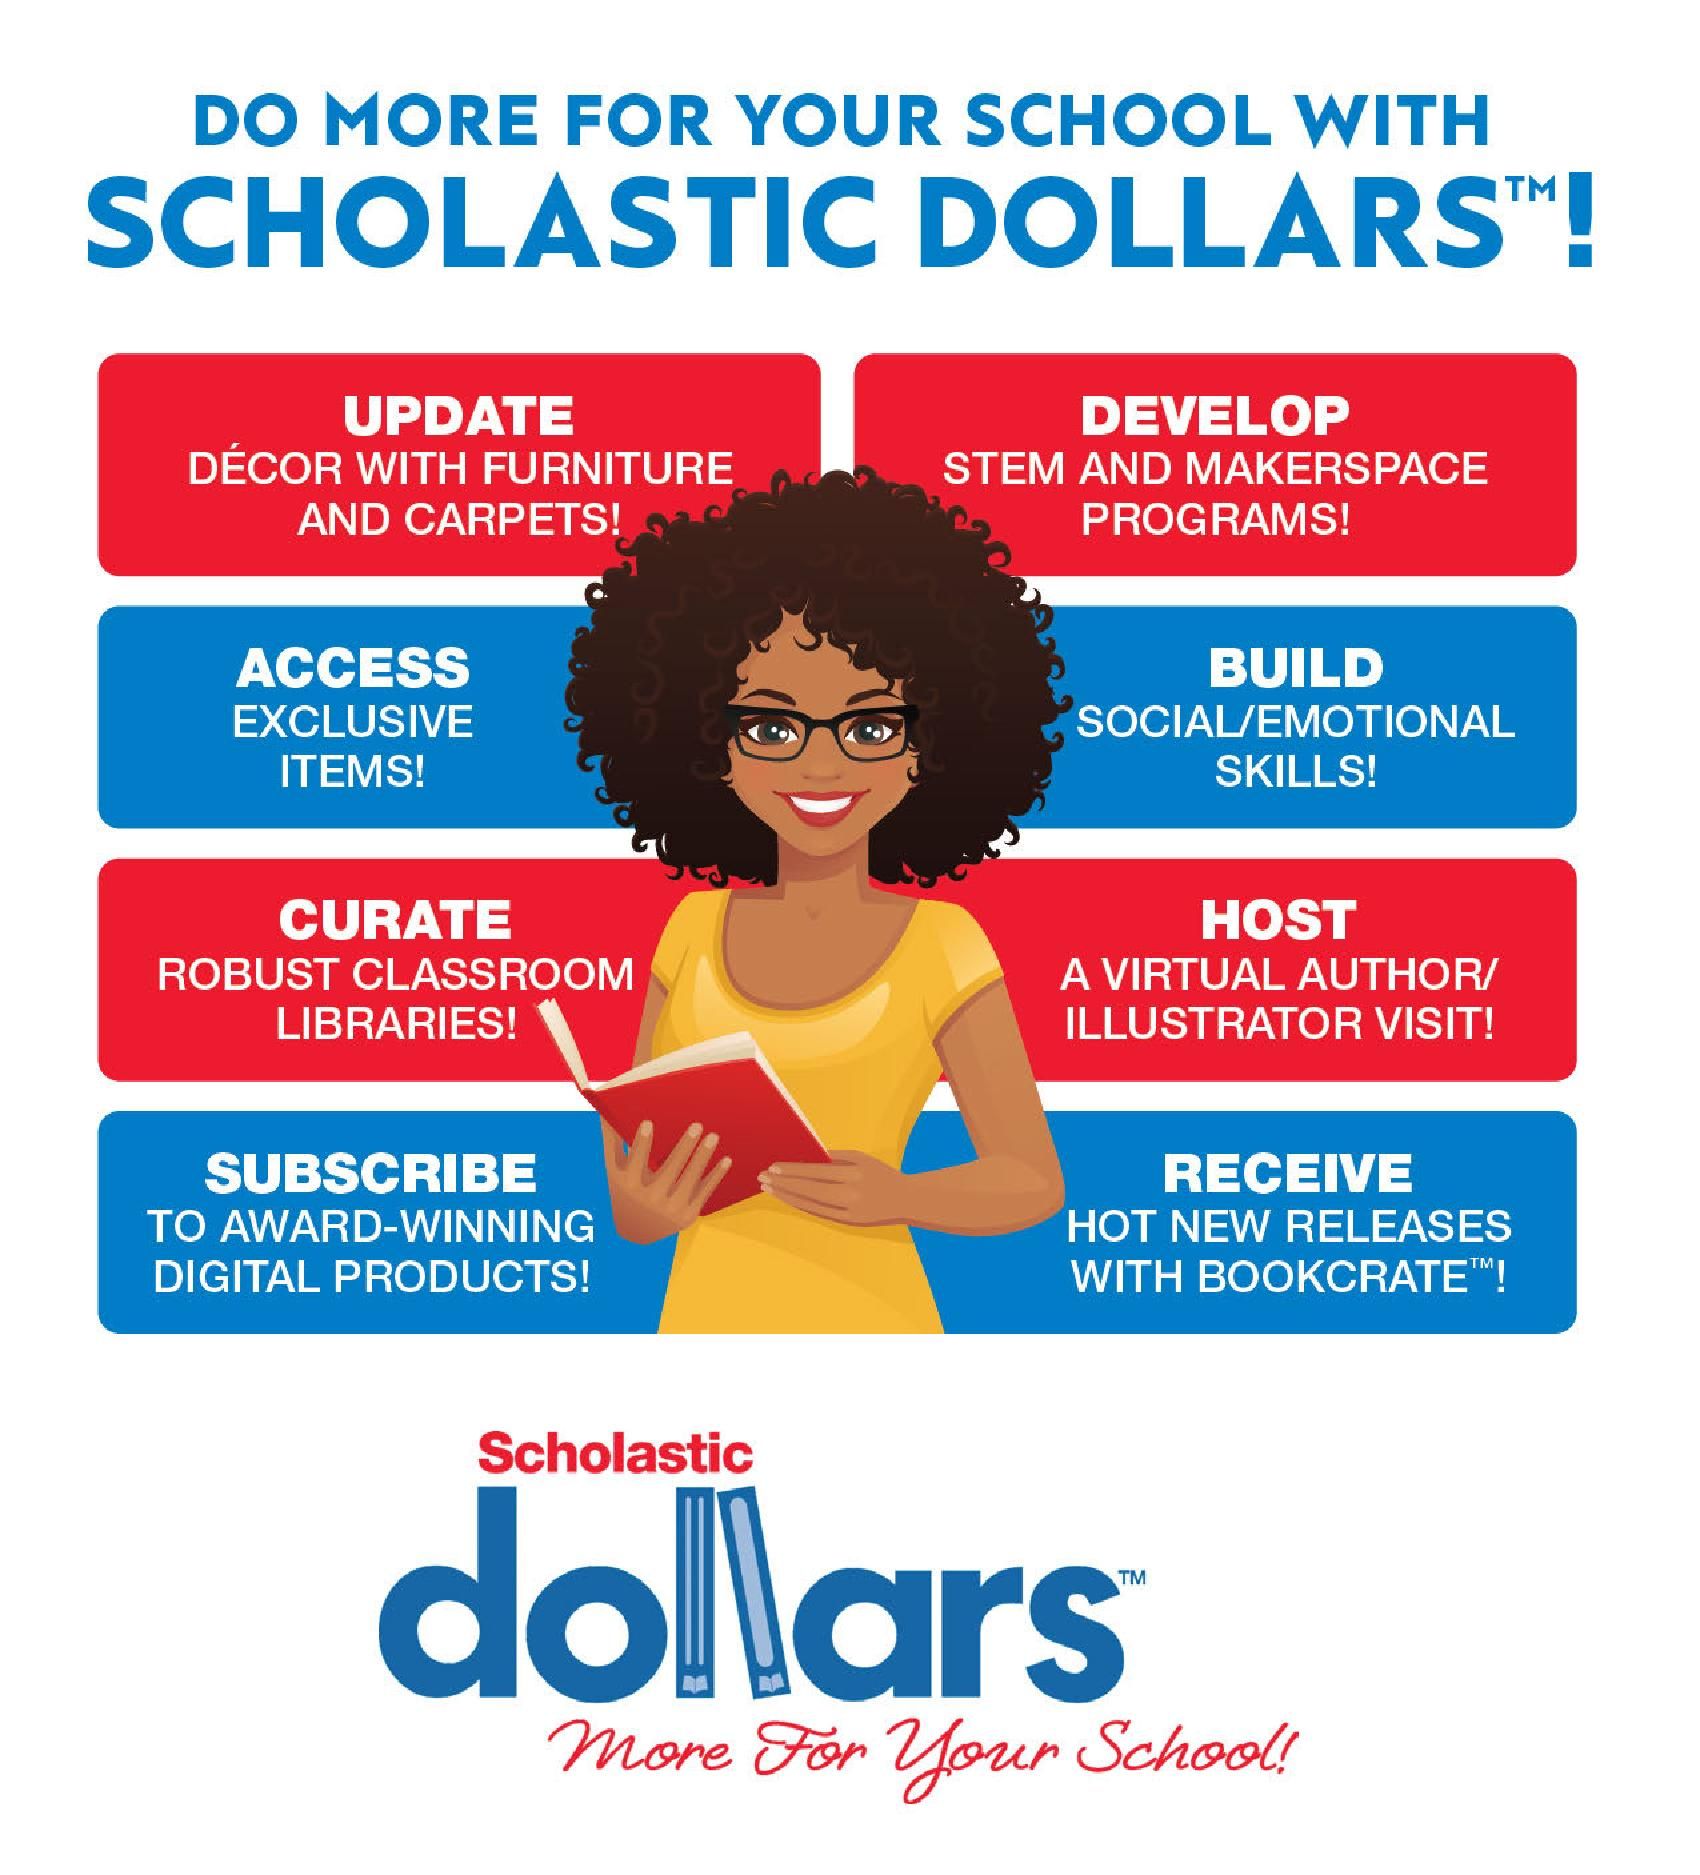 All About Scholastic Dollars